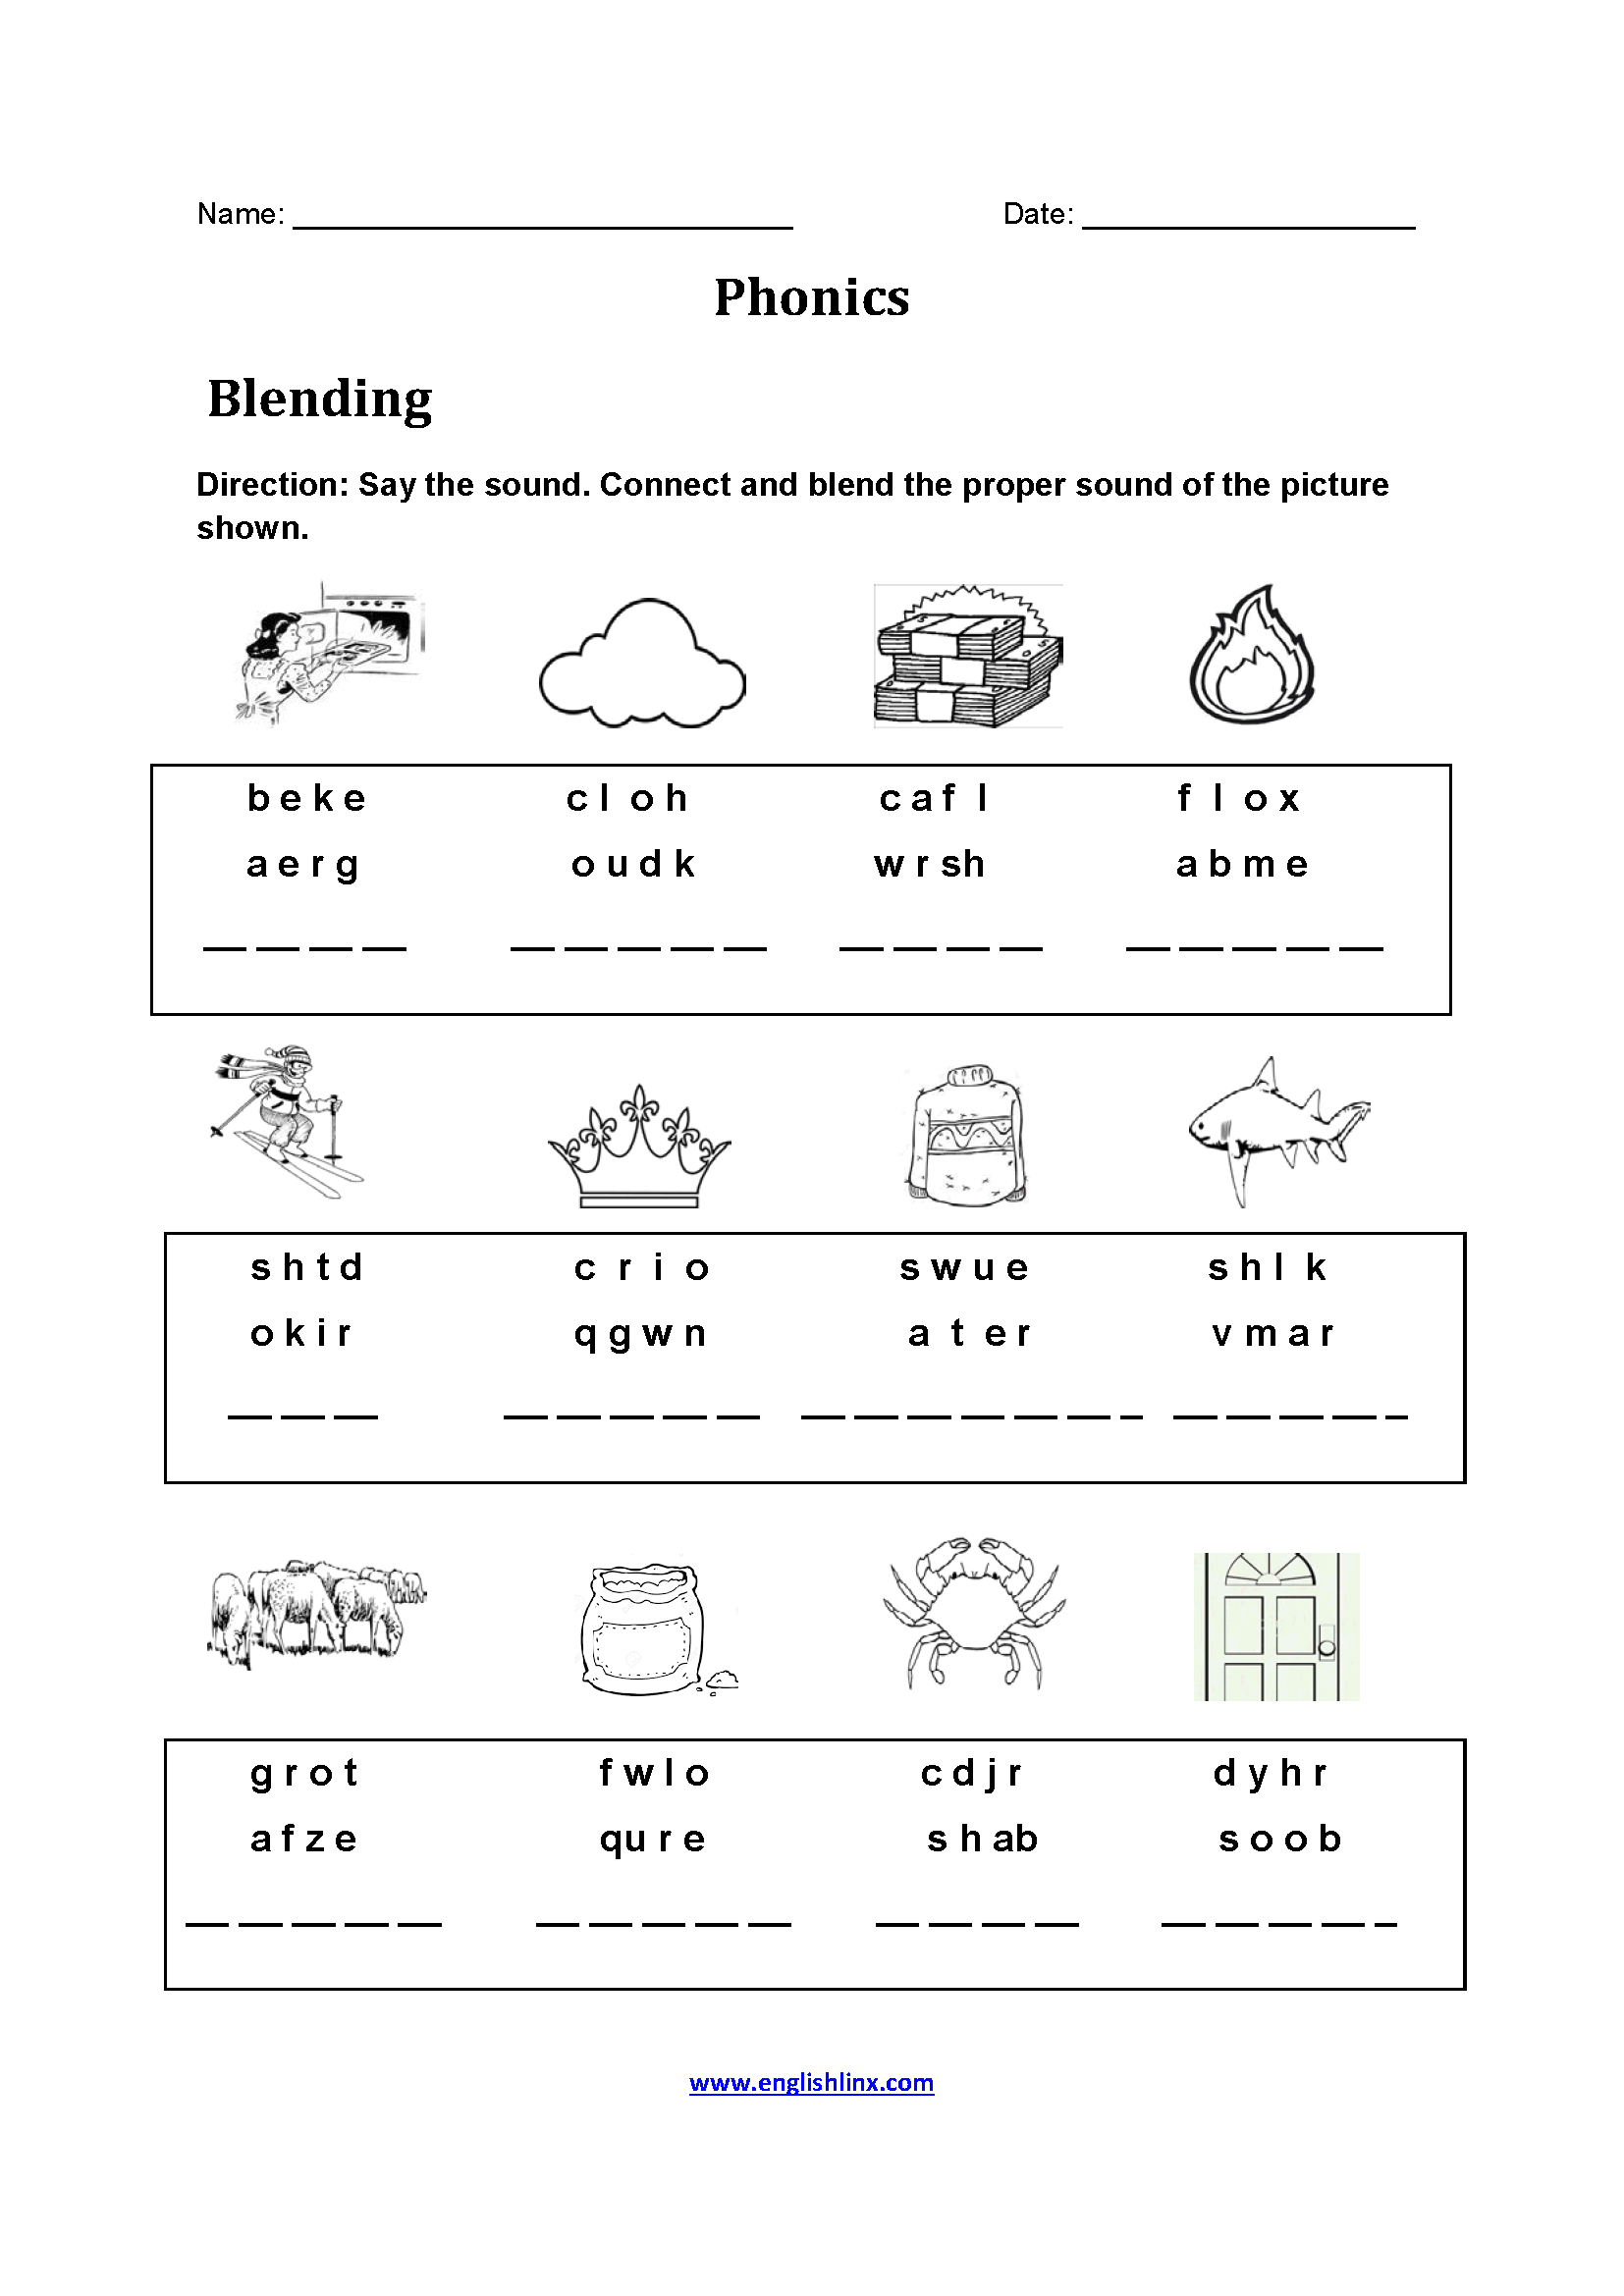 phonics-worksheets-for-adults-printable-peggy-worksheets